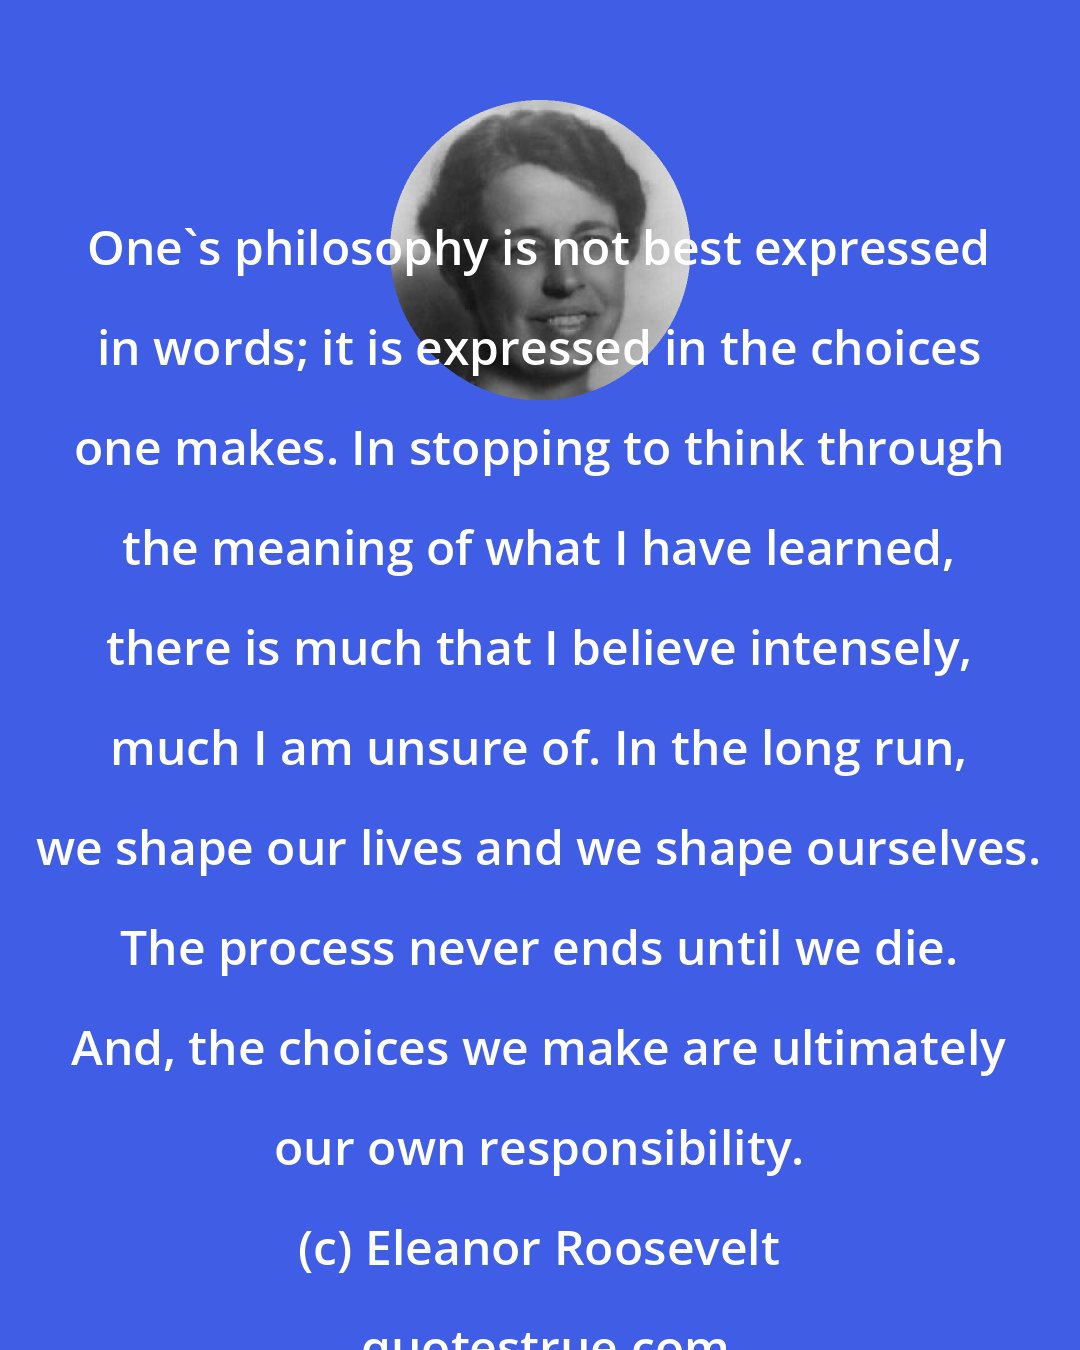 Eleanor Roosevelt: One's philosophy is not best expressed in words; it is expressed in the choices one makes. In stopping to think through the meaning of what I have learned, there is much that I believe intensely, much I am unsure of. In the long run, we shape our lives and we shape ourselves. The process never ends until we die. And, the choices we make are ultimately our own responsibility.